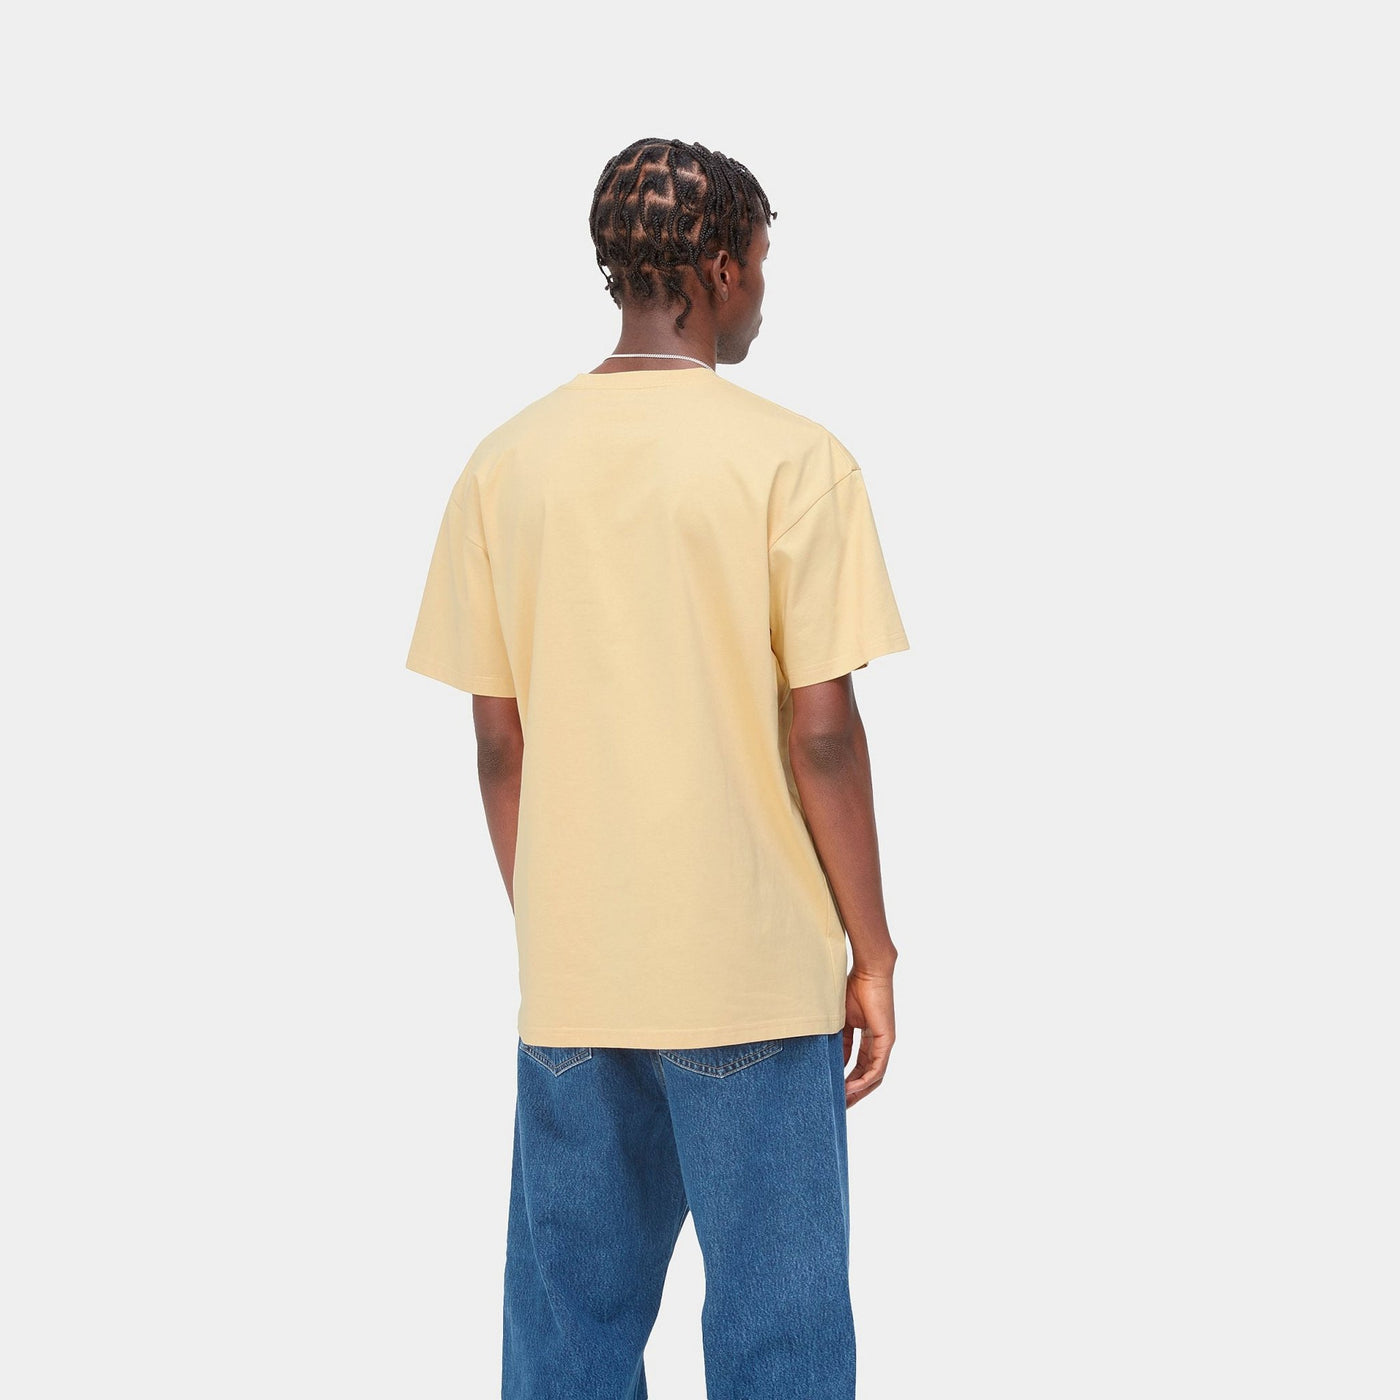 Carhartt WIP - S/S Chase T-Shirt Citron Gold - Lothaire